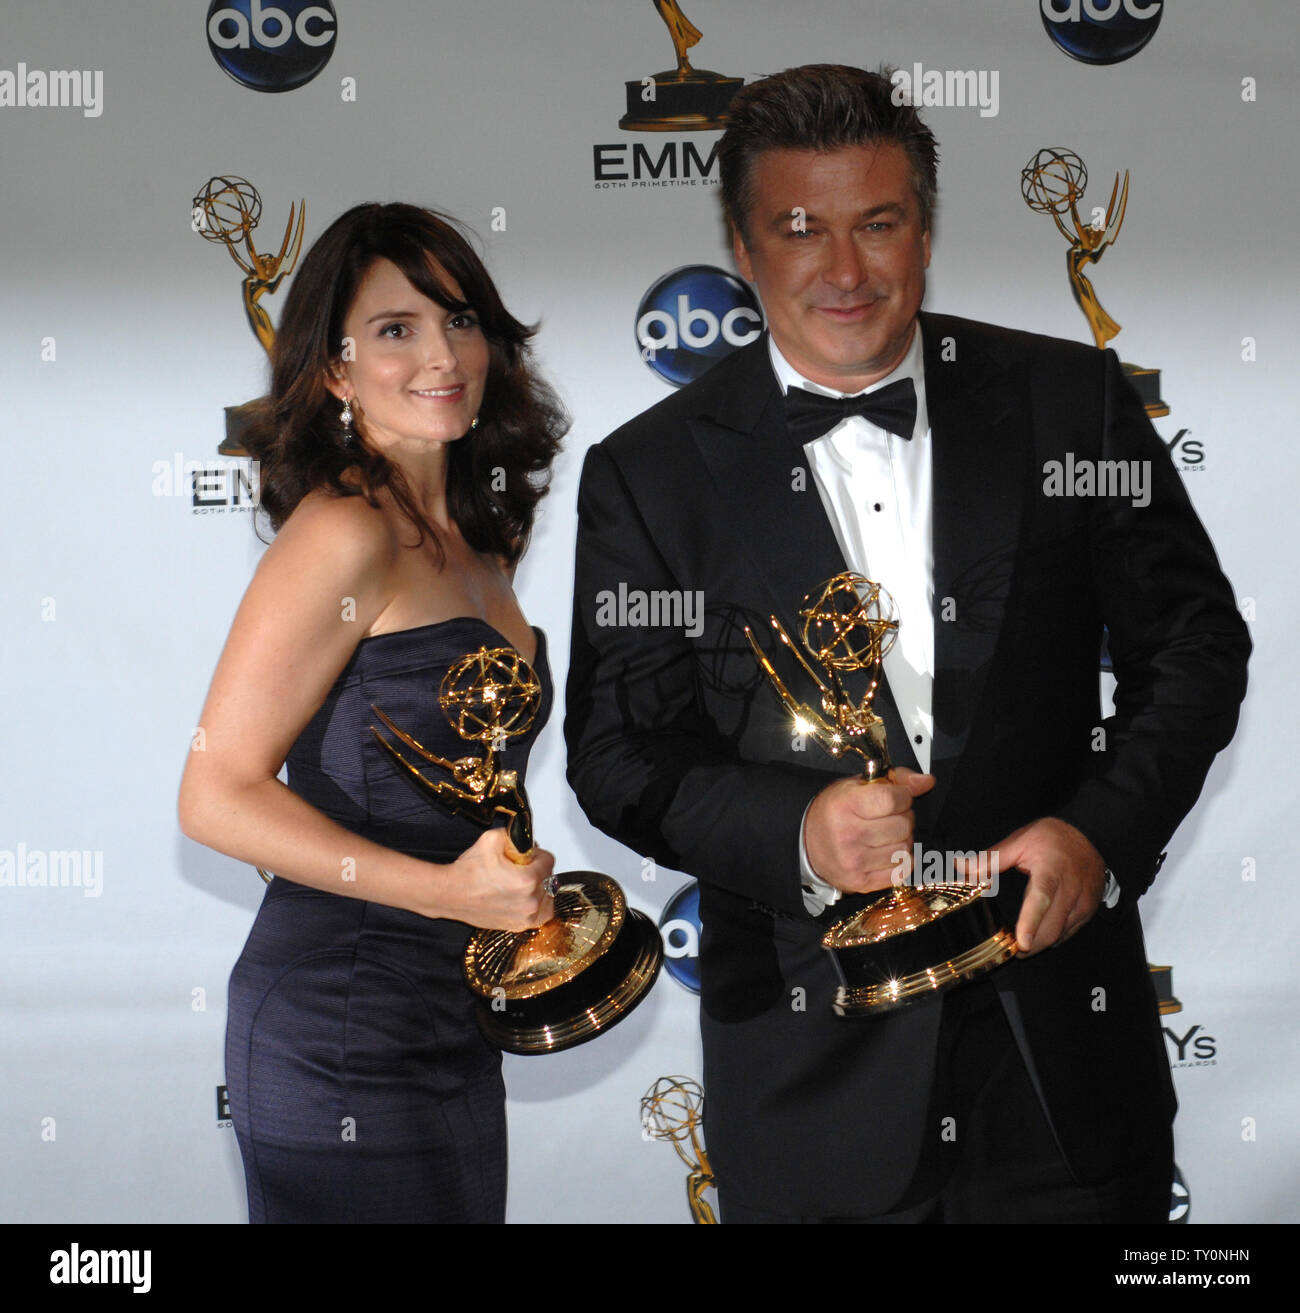 Tina Fey and Alec Baldwin appear backstage with Emmy Awards for their work on '30 Rock' at the 60th Primetime Emmy Awards at the Nokia Center in Los Angeles on September 21, 2008.    (UPI Photo/Scott Harms) Stock Photo